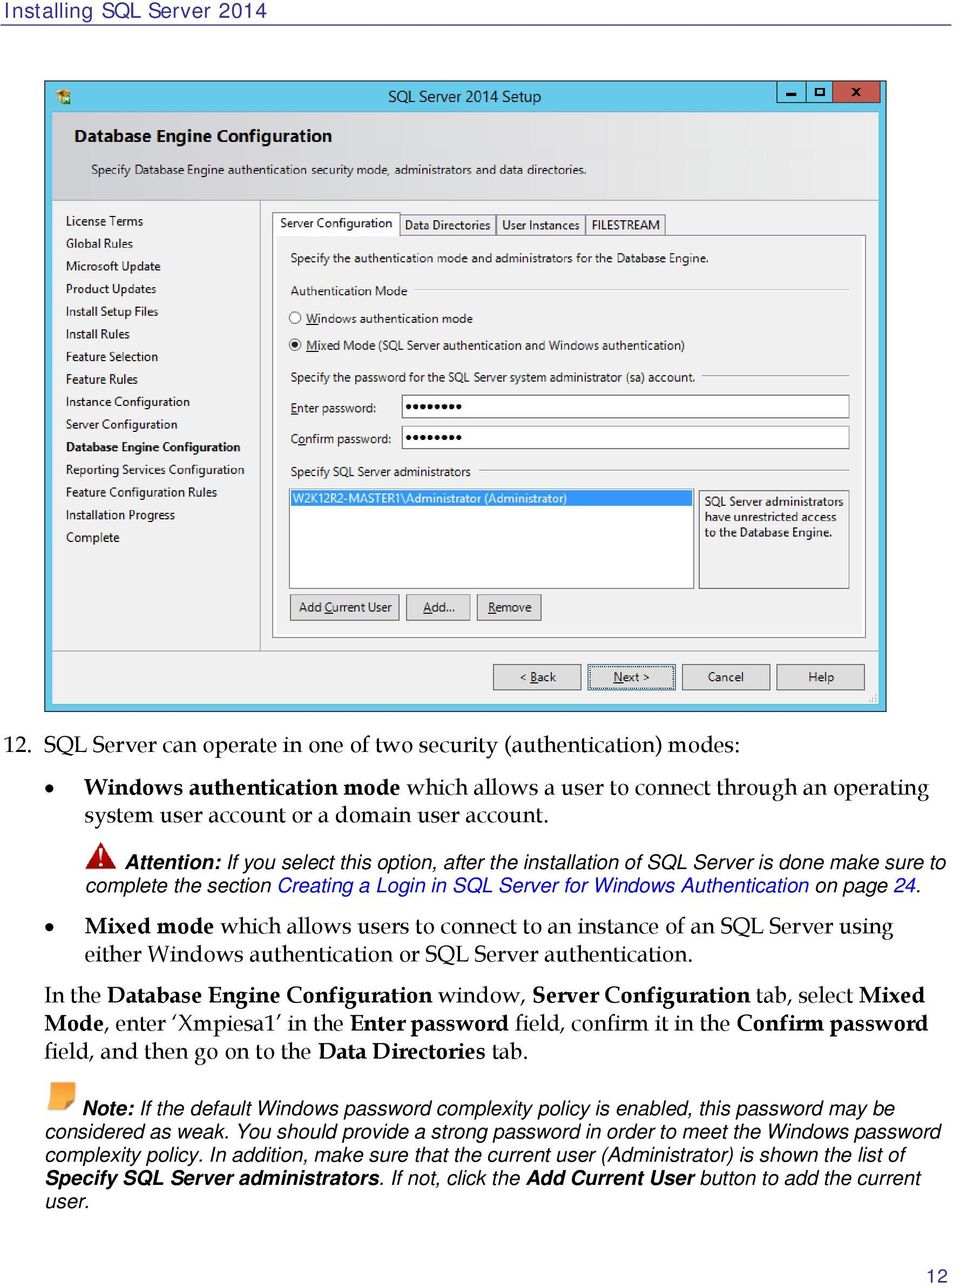 Attention: If you select this option, after the installation of SQL Server is done make sure to complete the section Creating a Login in SQL Server for Windows Authentication on page 24.